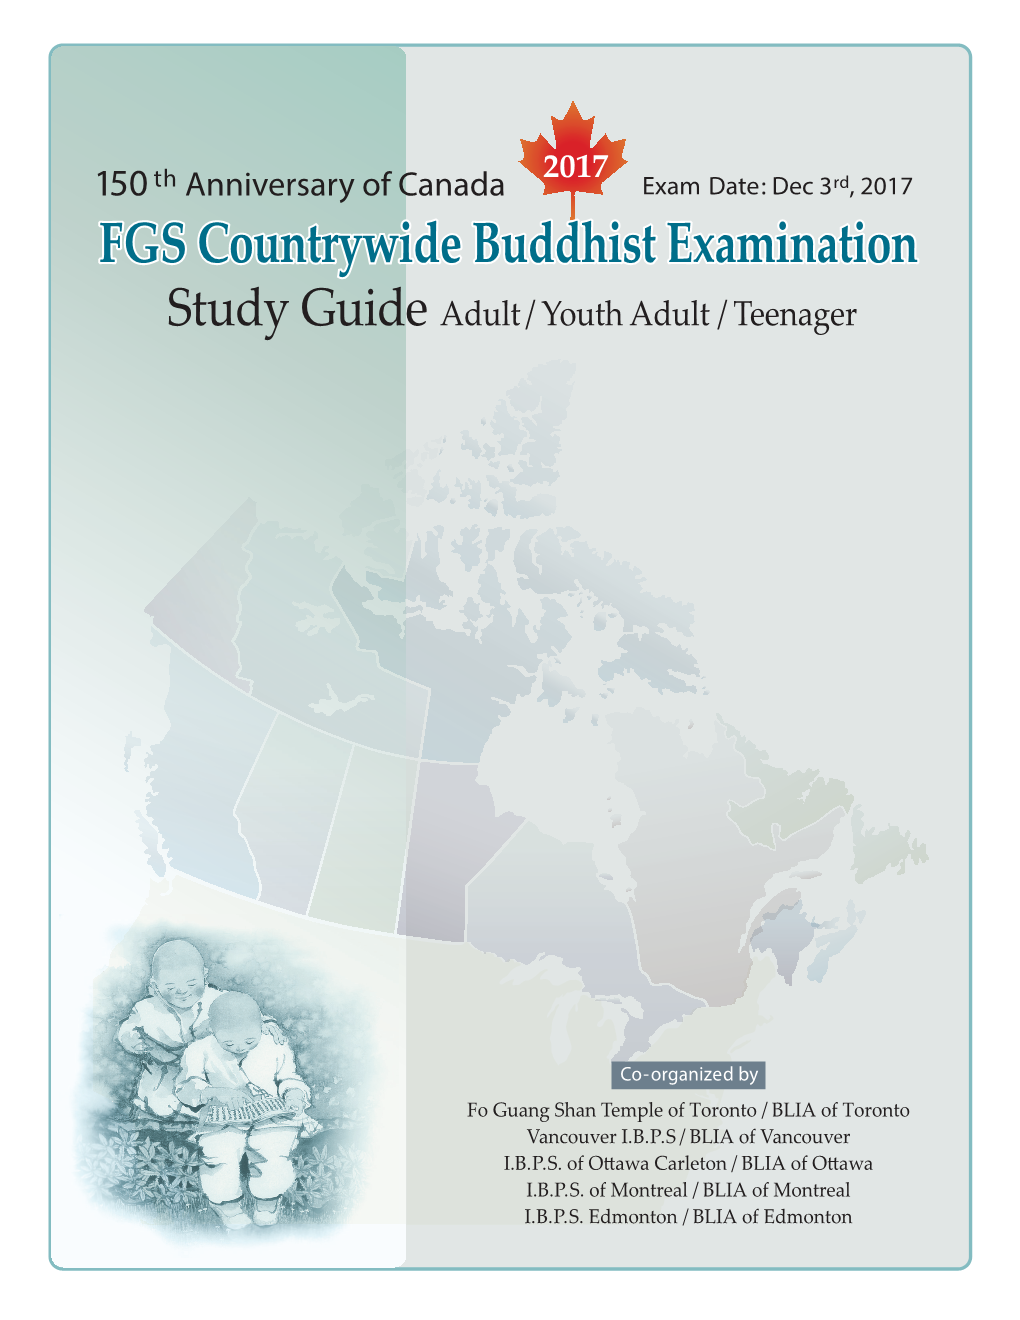 2017 FGS Countrywide Buddhist Examination Exam Study Guide